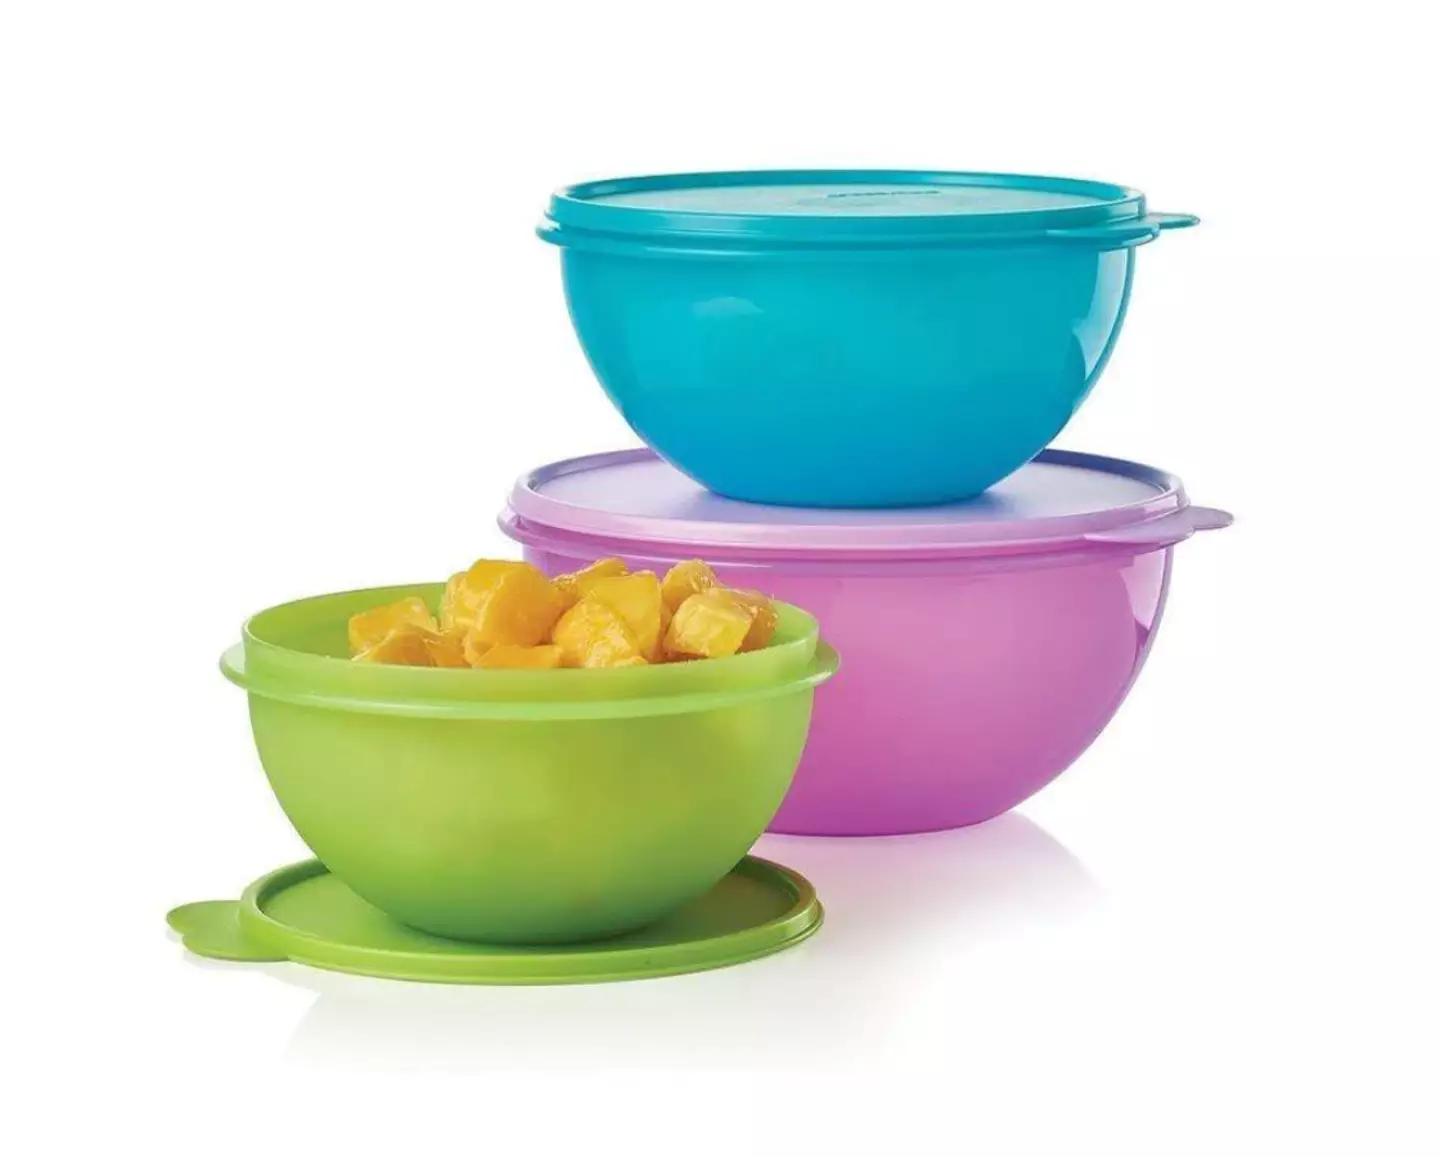 Tupperware sells all kinds of containers.